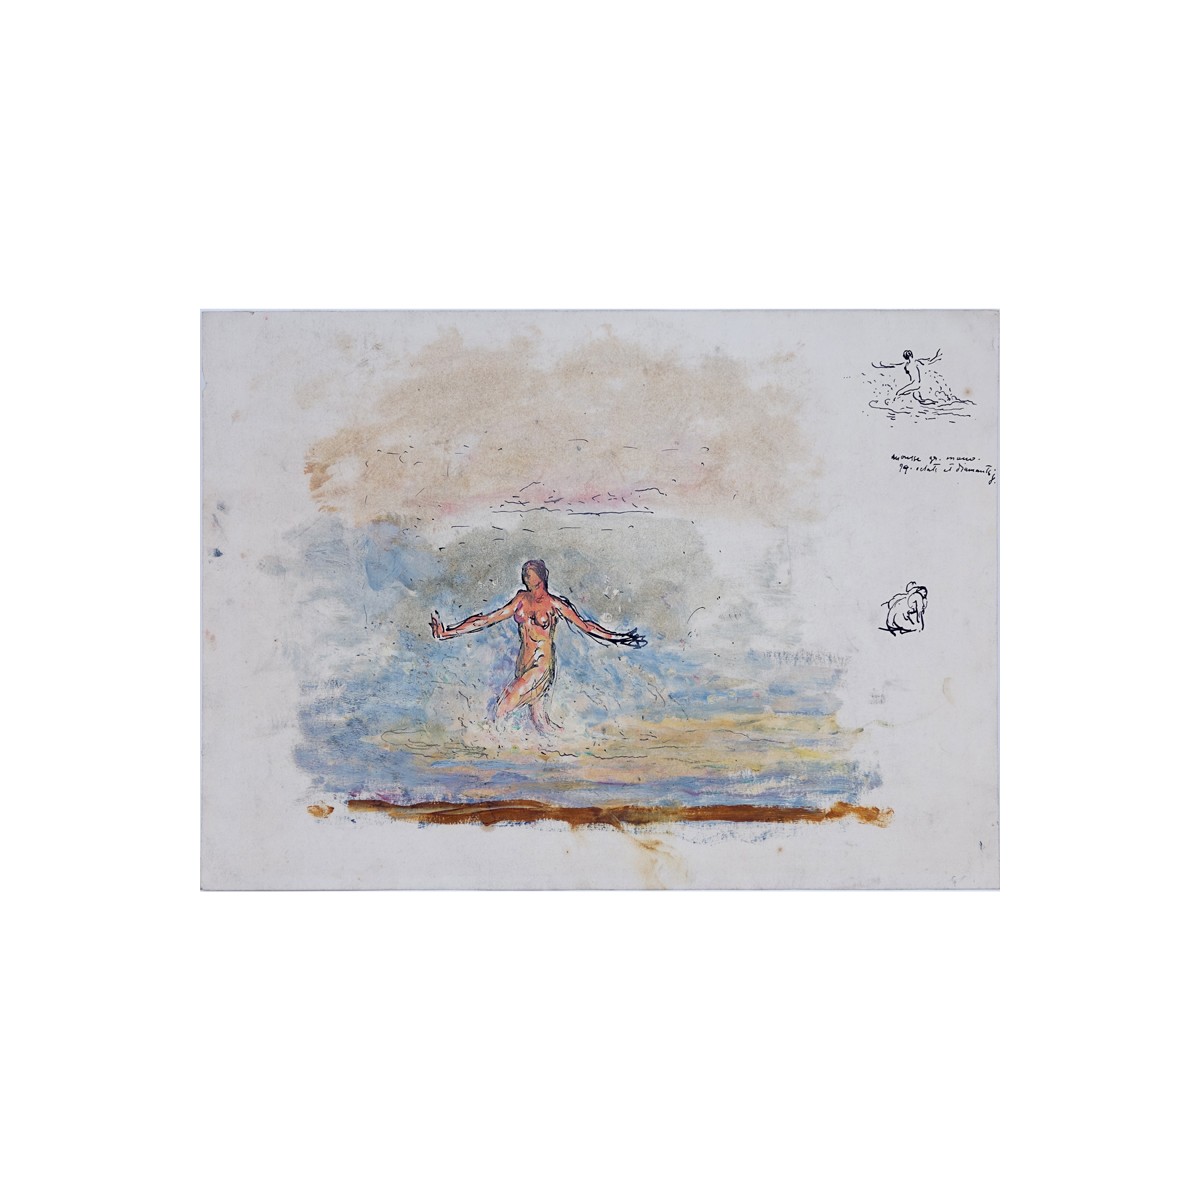 Attributed to: Michel Simonidy, Romanian (1870 - 1933) Ink and watercolor on paper "Nude Swimmer", 